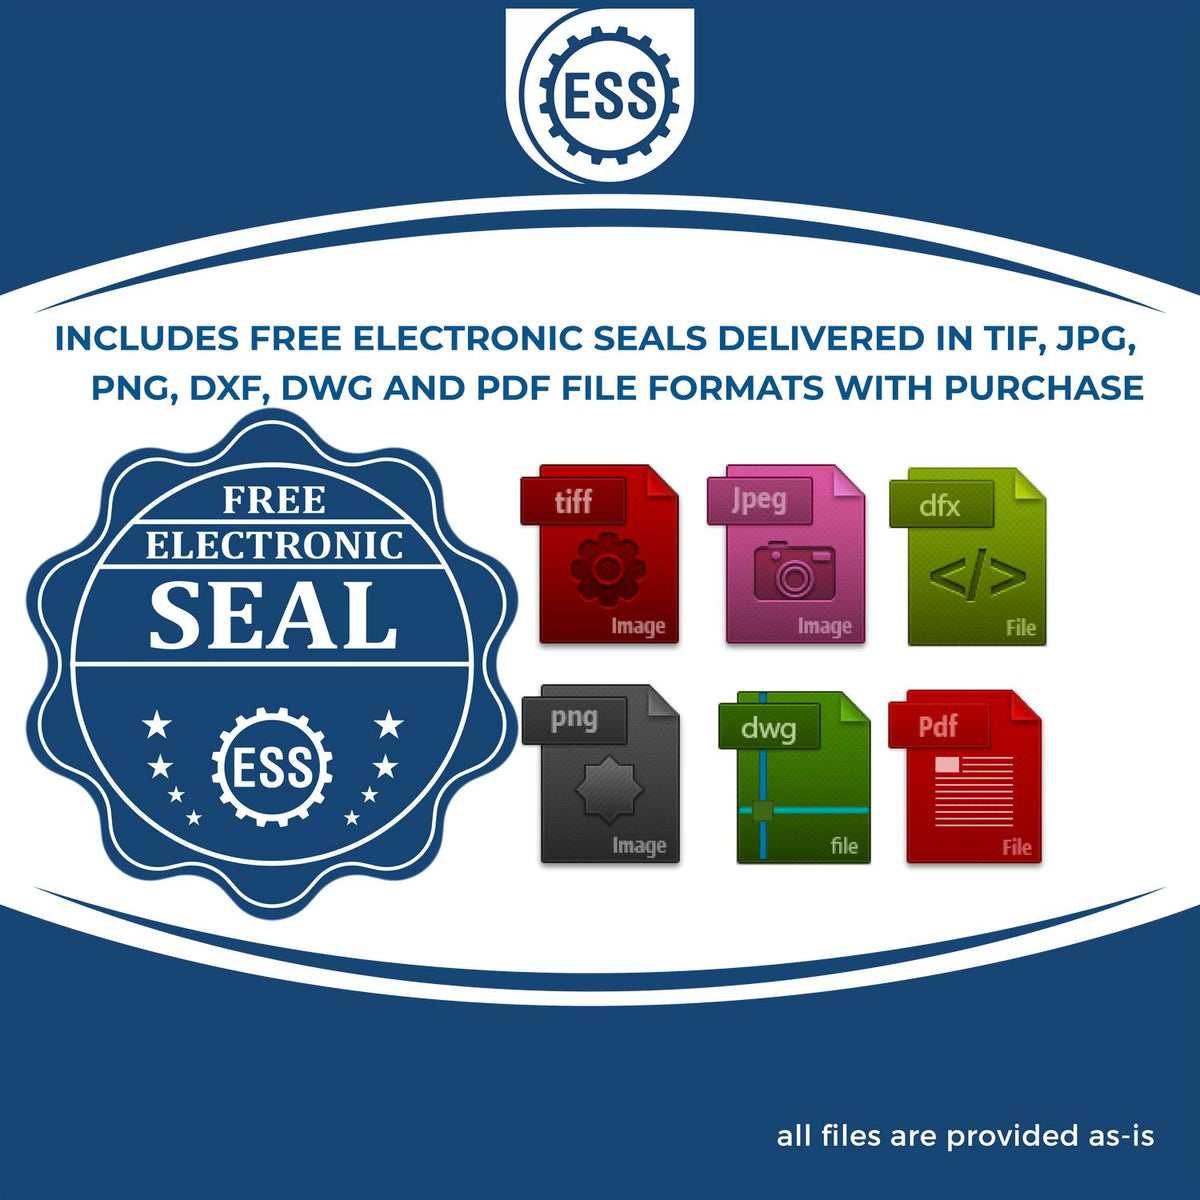 An infographic for the free electronic seal for the Heavy Duty Cast Iron Kentucky Engineer Seal Embosser illustrating the different file type icons such as DXF, DWG, TIF, JPG and PNG.